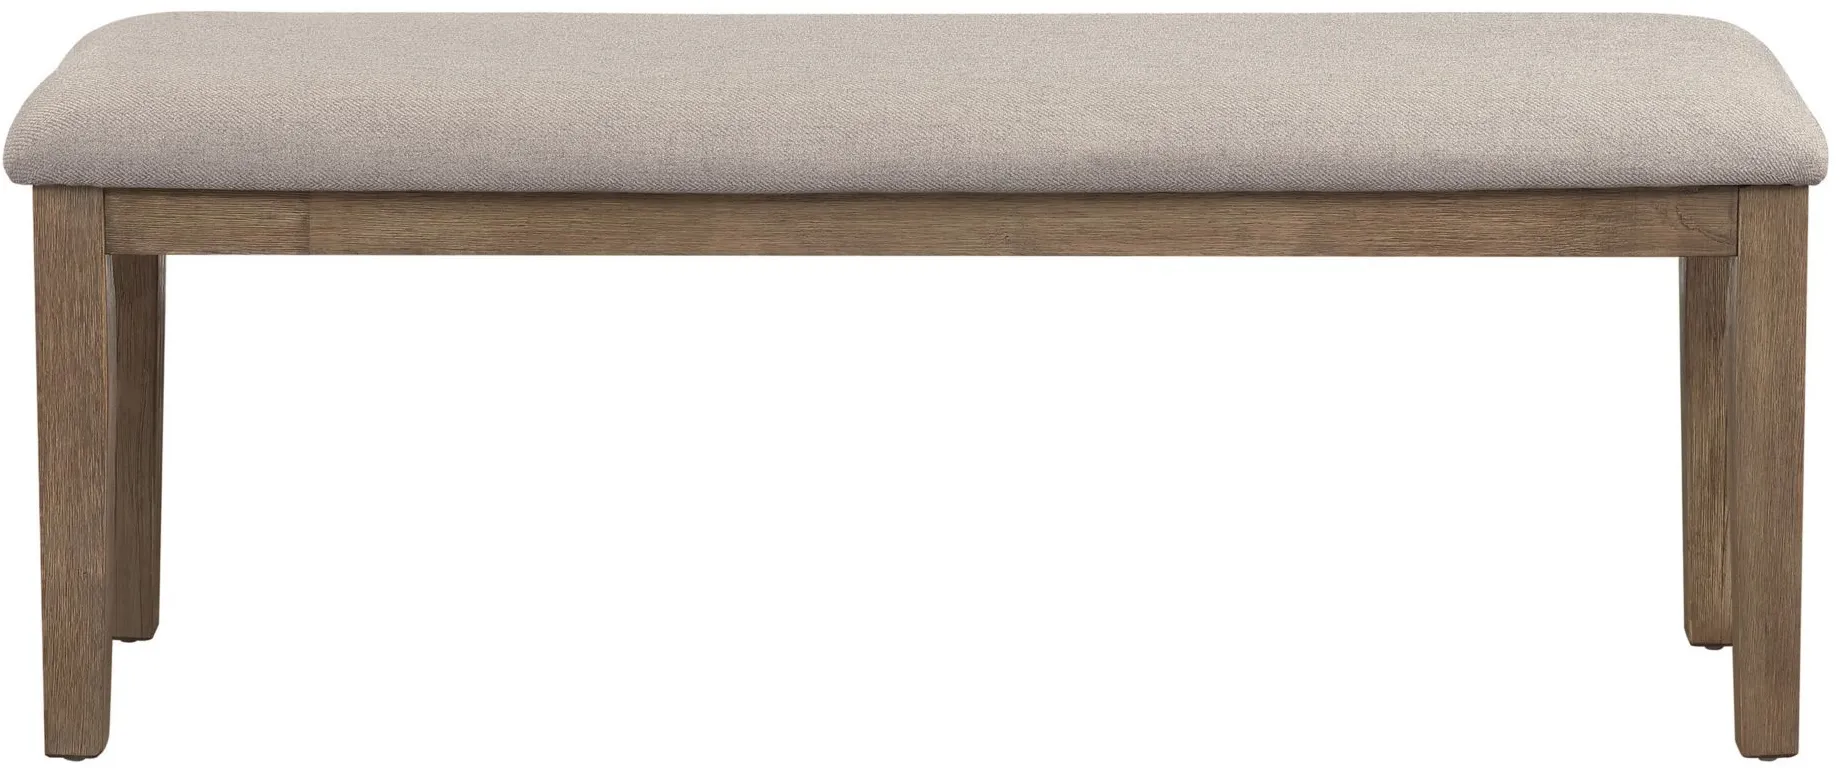 Brim Dining Room Bench in Wire Brushed Brown by Homelegance